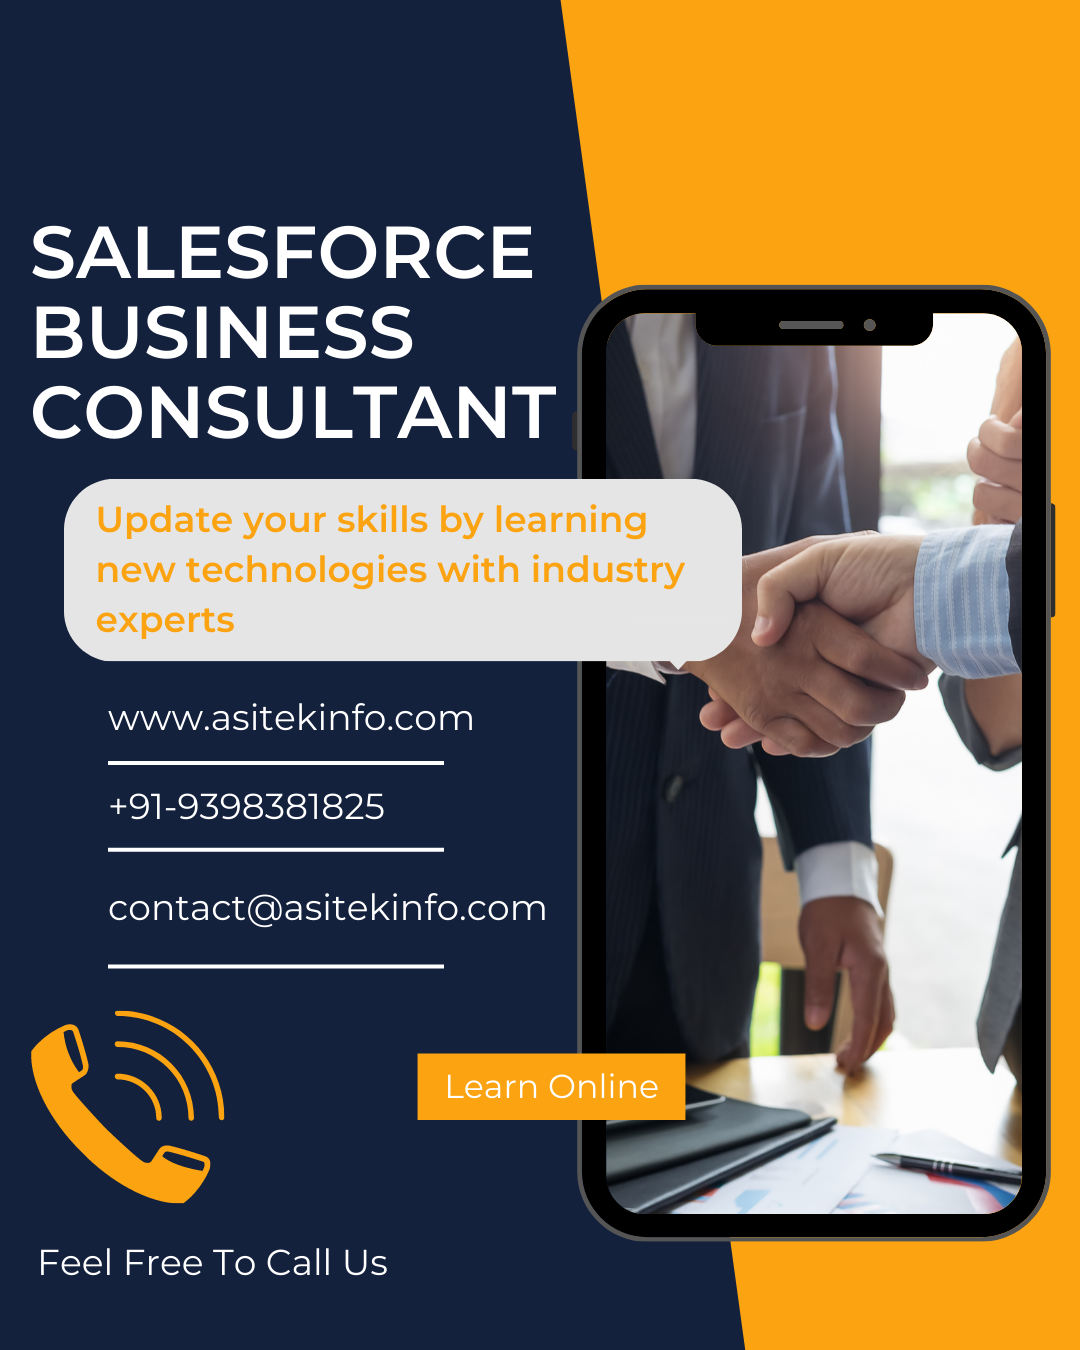 Salesforce Business consultant-Learn Online